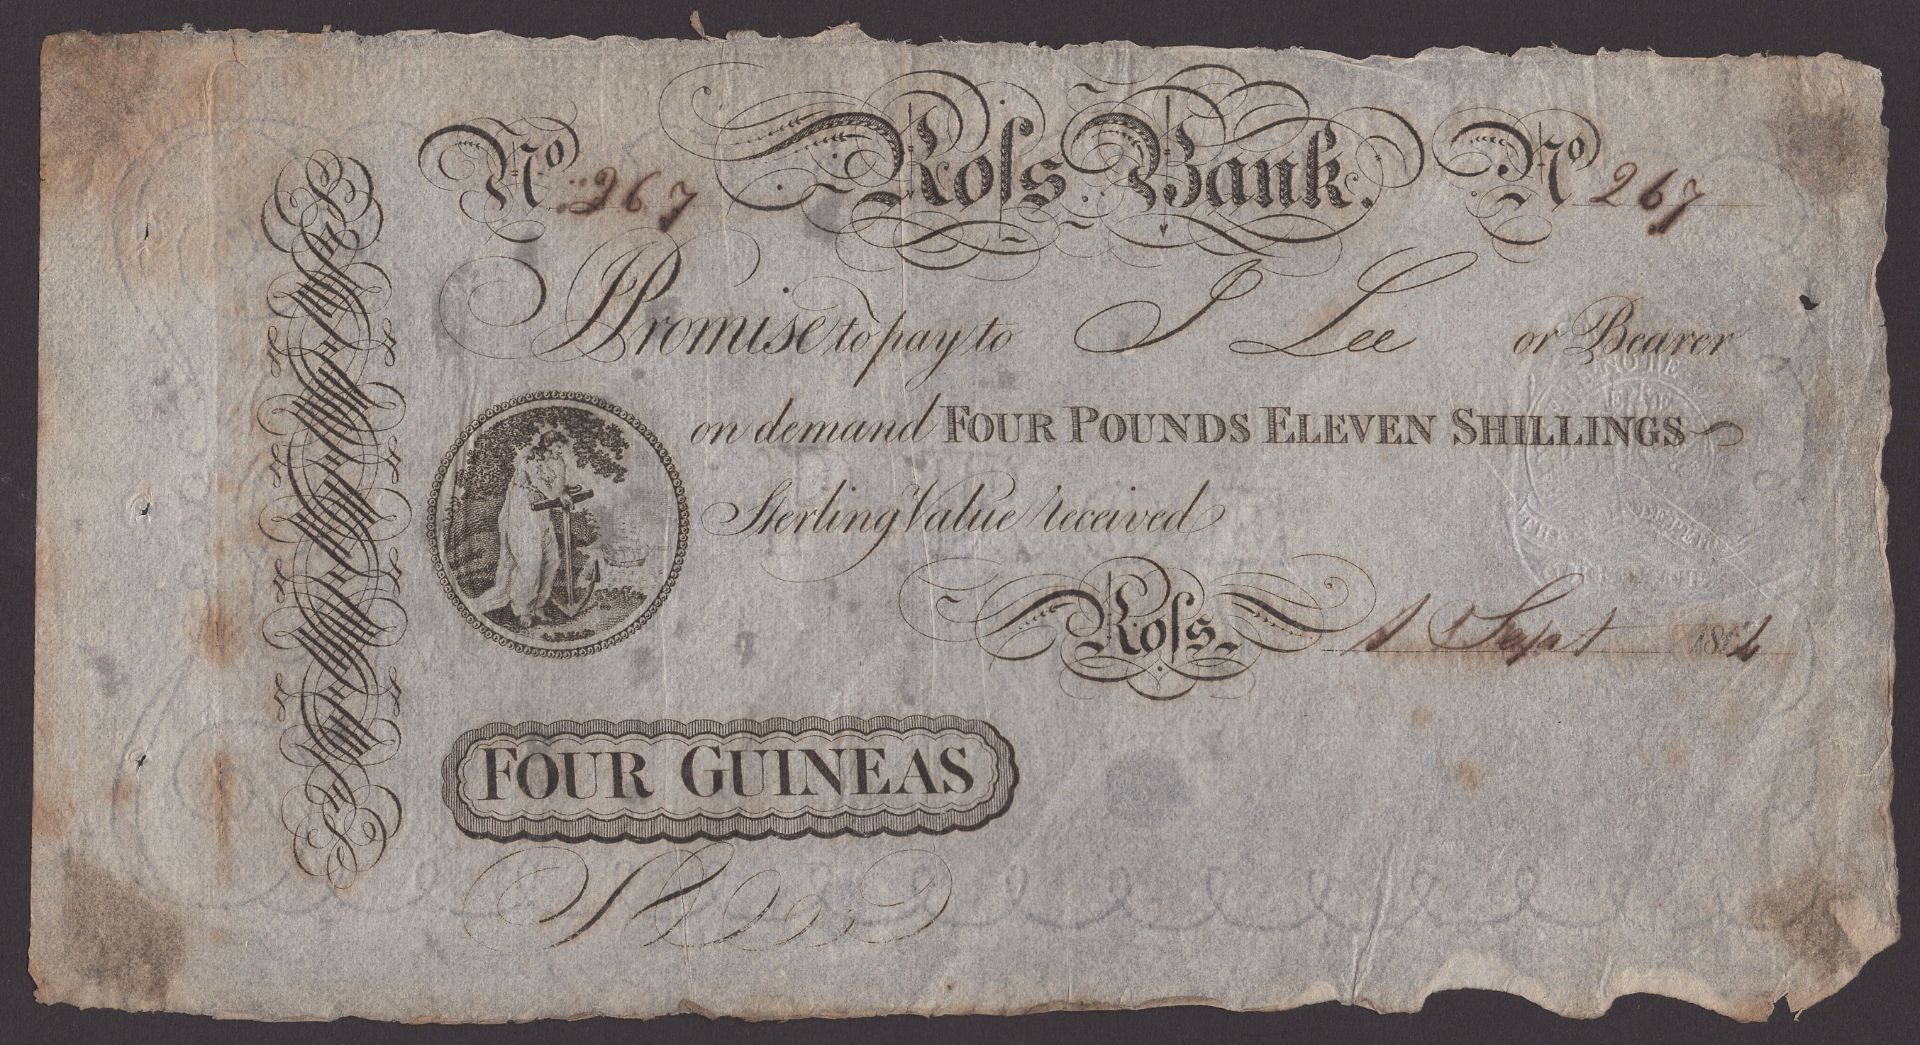 Ross Bank, 3 Guineas (3 Pounds, 8 Shillings and 3 Pence), 1 November 1814, serial number 285...